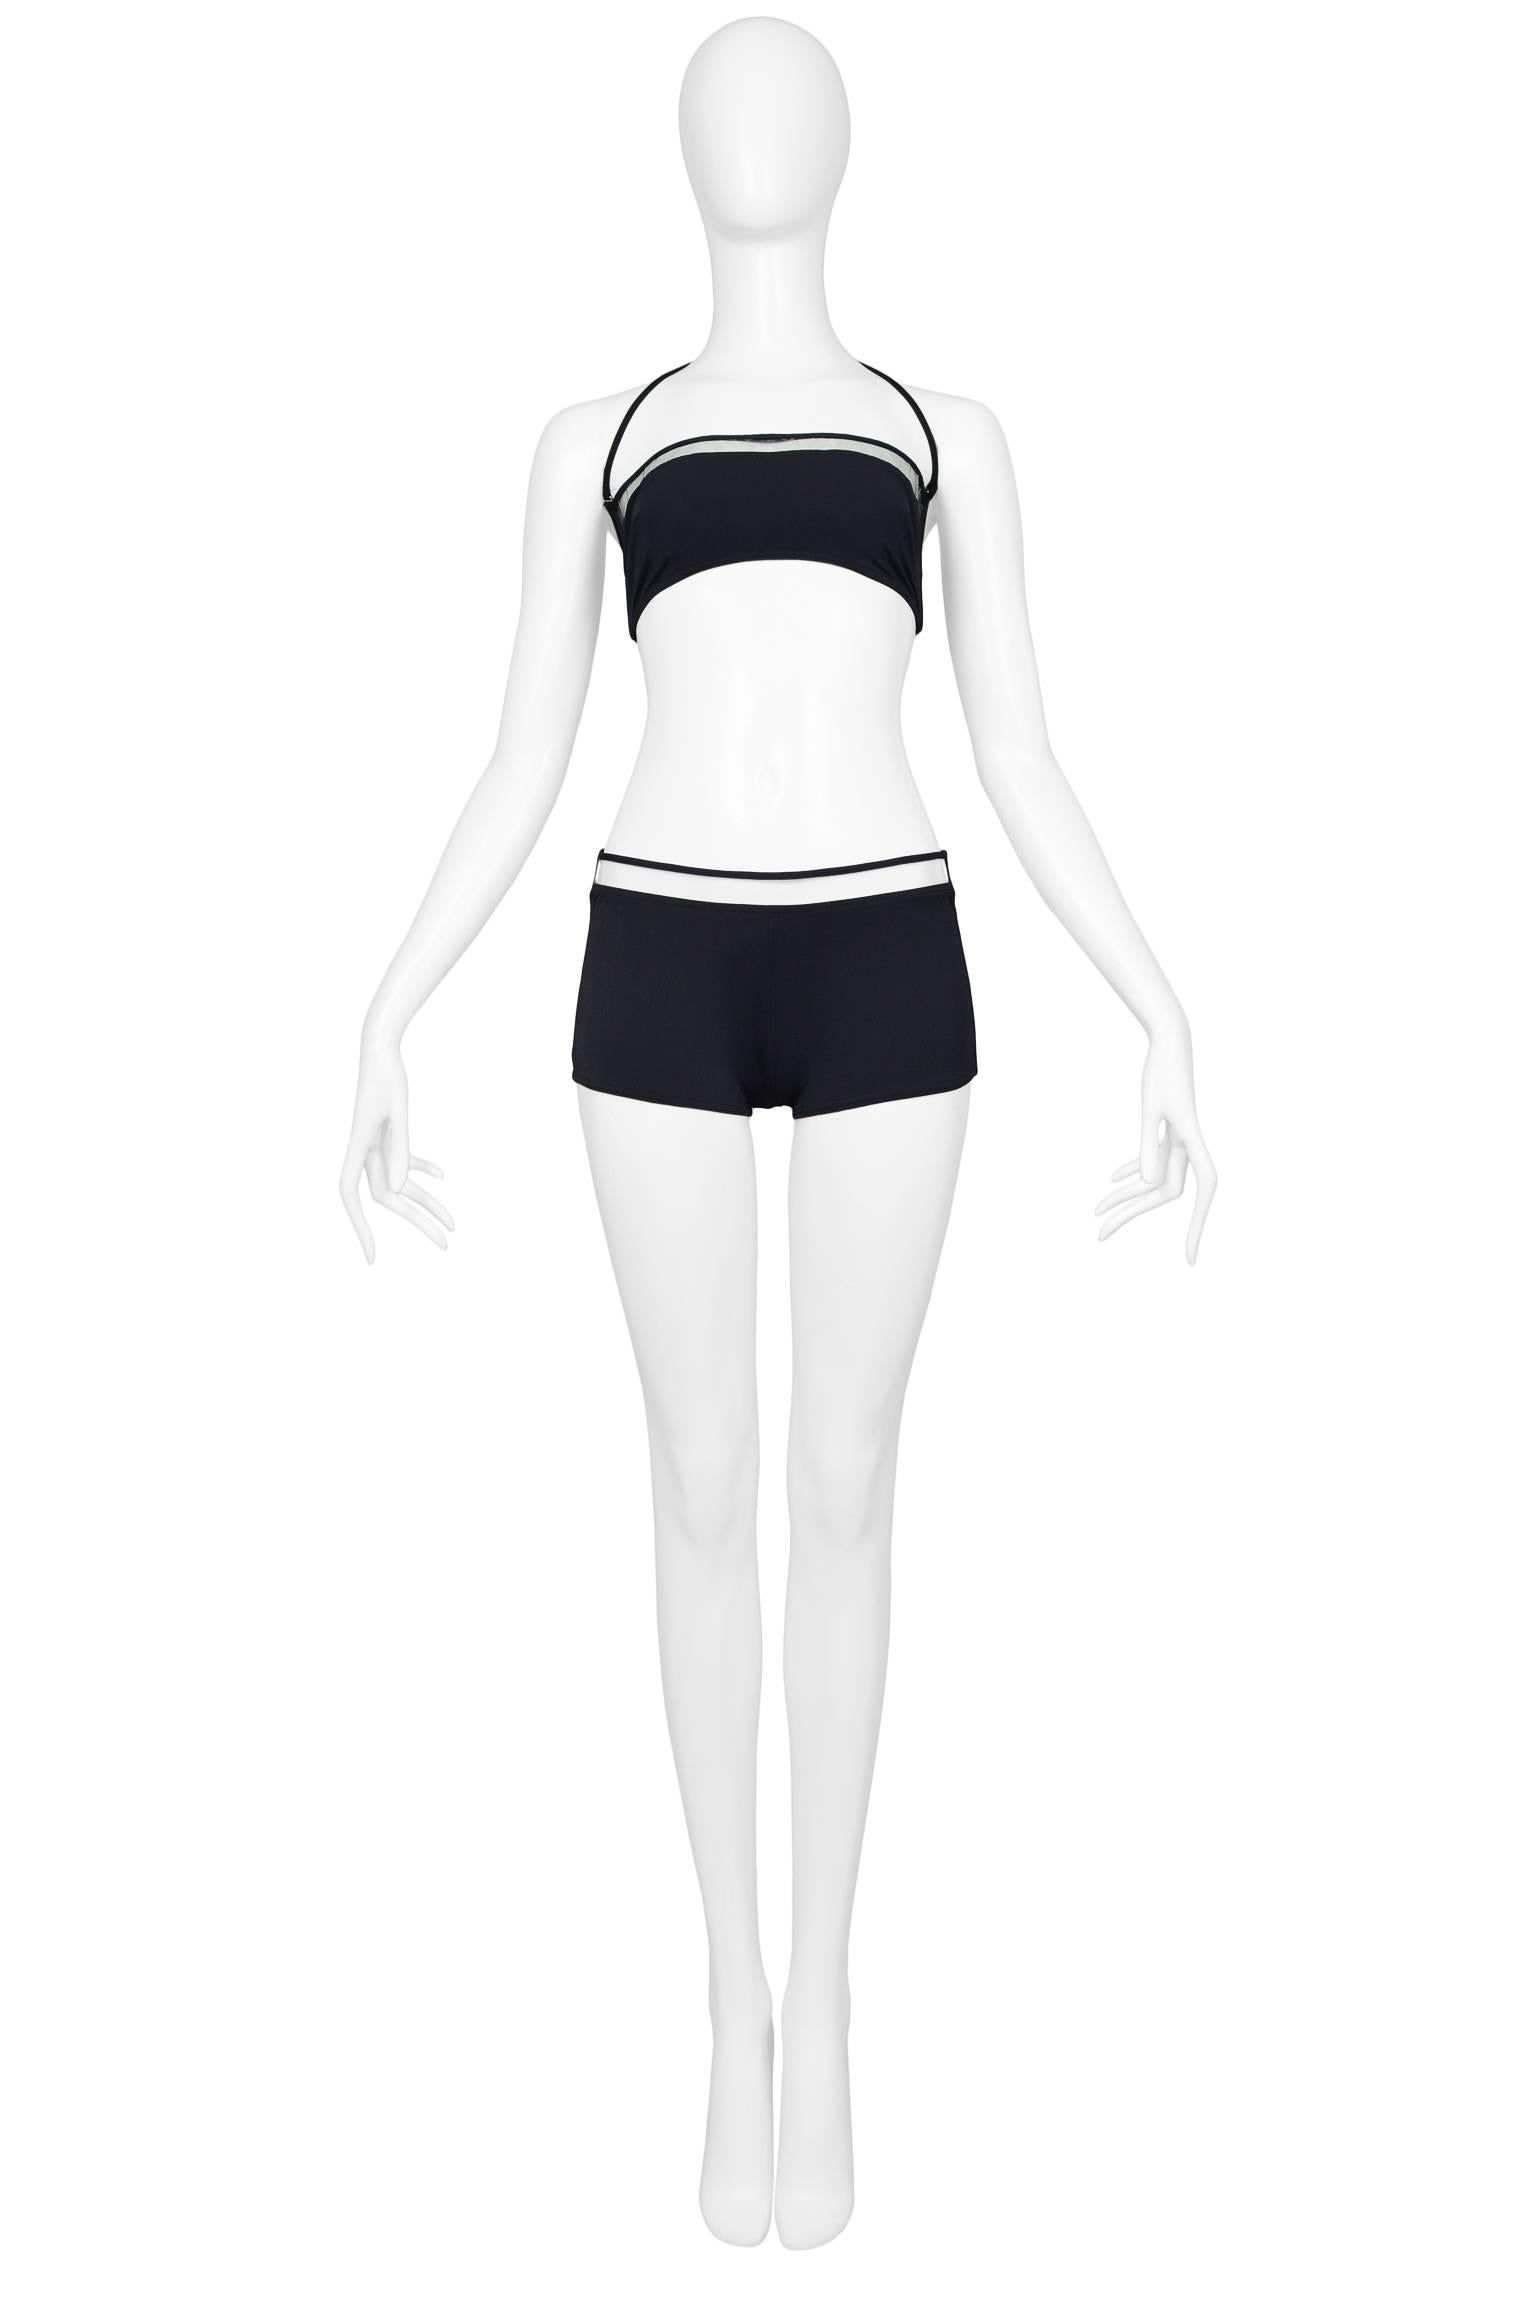 Fabulous Paco Rabanne futuristic mod black lycra bikini swim suit with clear vinyl insets at bust and waist. Top has detachable straps and can be worn as a bandeau. This suit has never worn. Deadstock vintage. Collection 2002. 